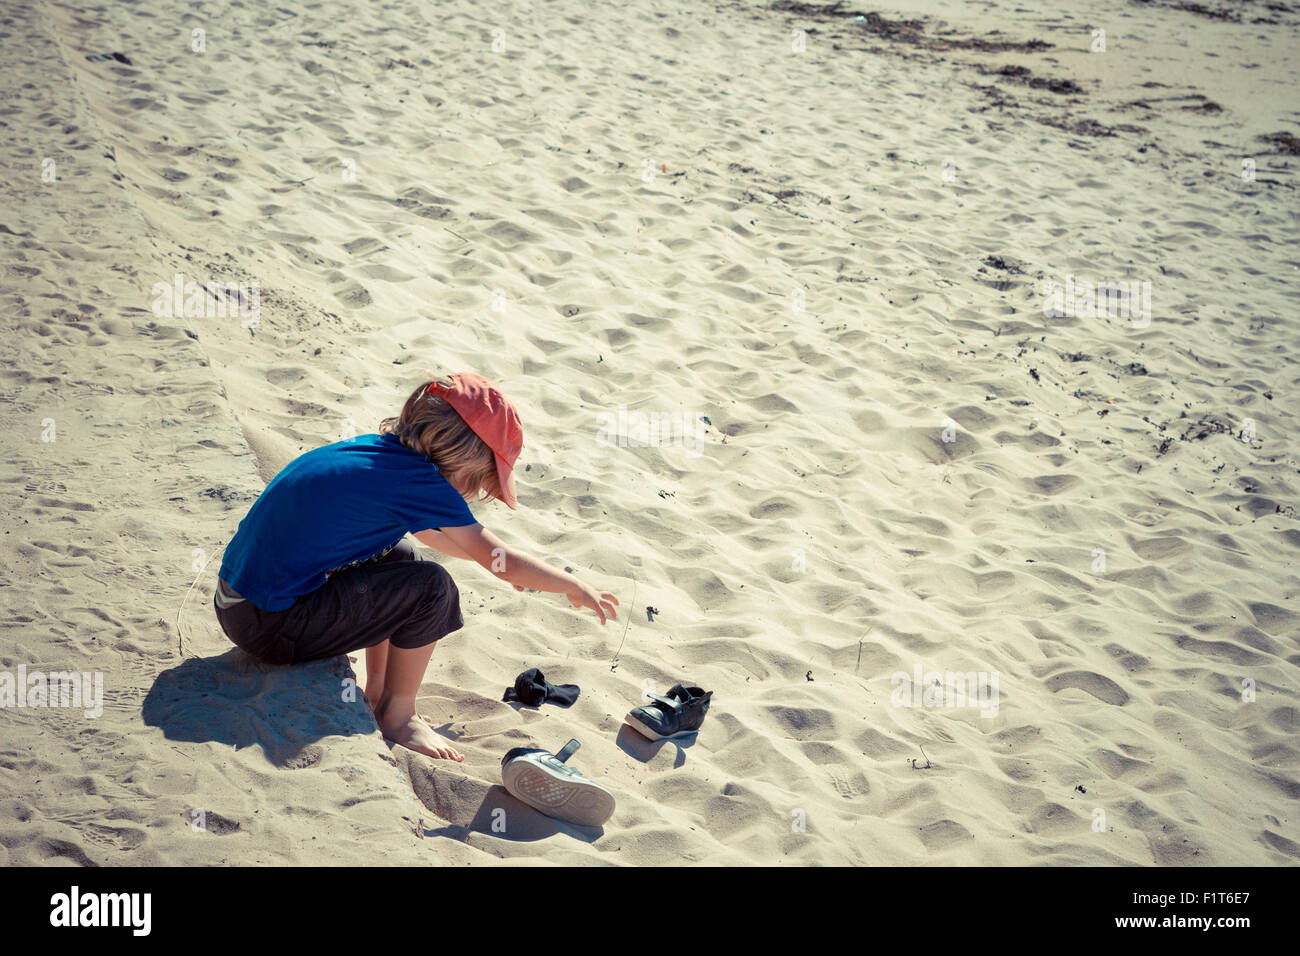 Young boy playing at the beach. Stock Photo